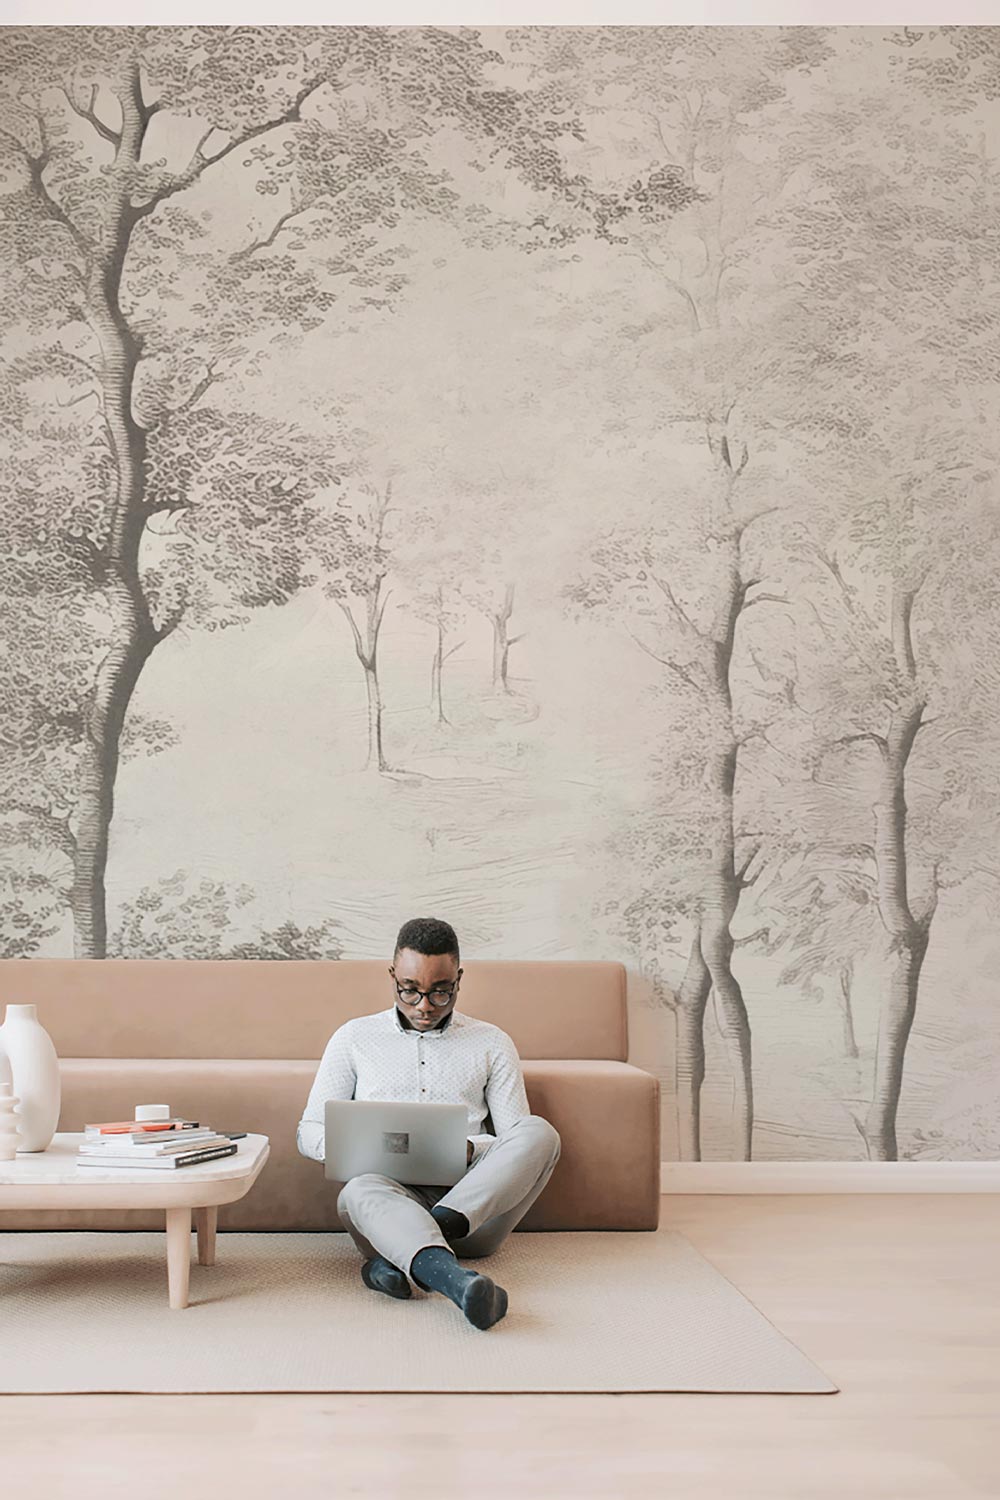 Man sitting on floor on laptop in front of couch. Birch Tree Wall Mural in background.